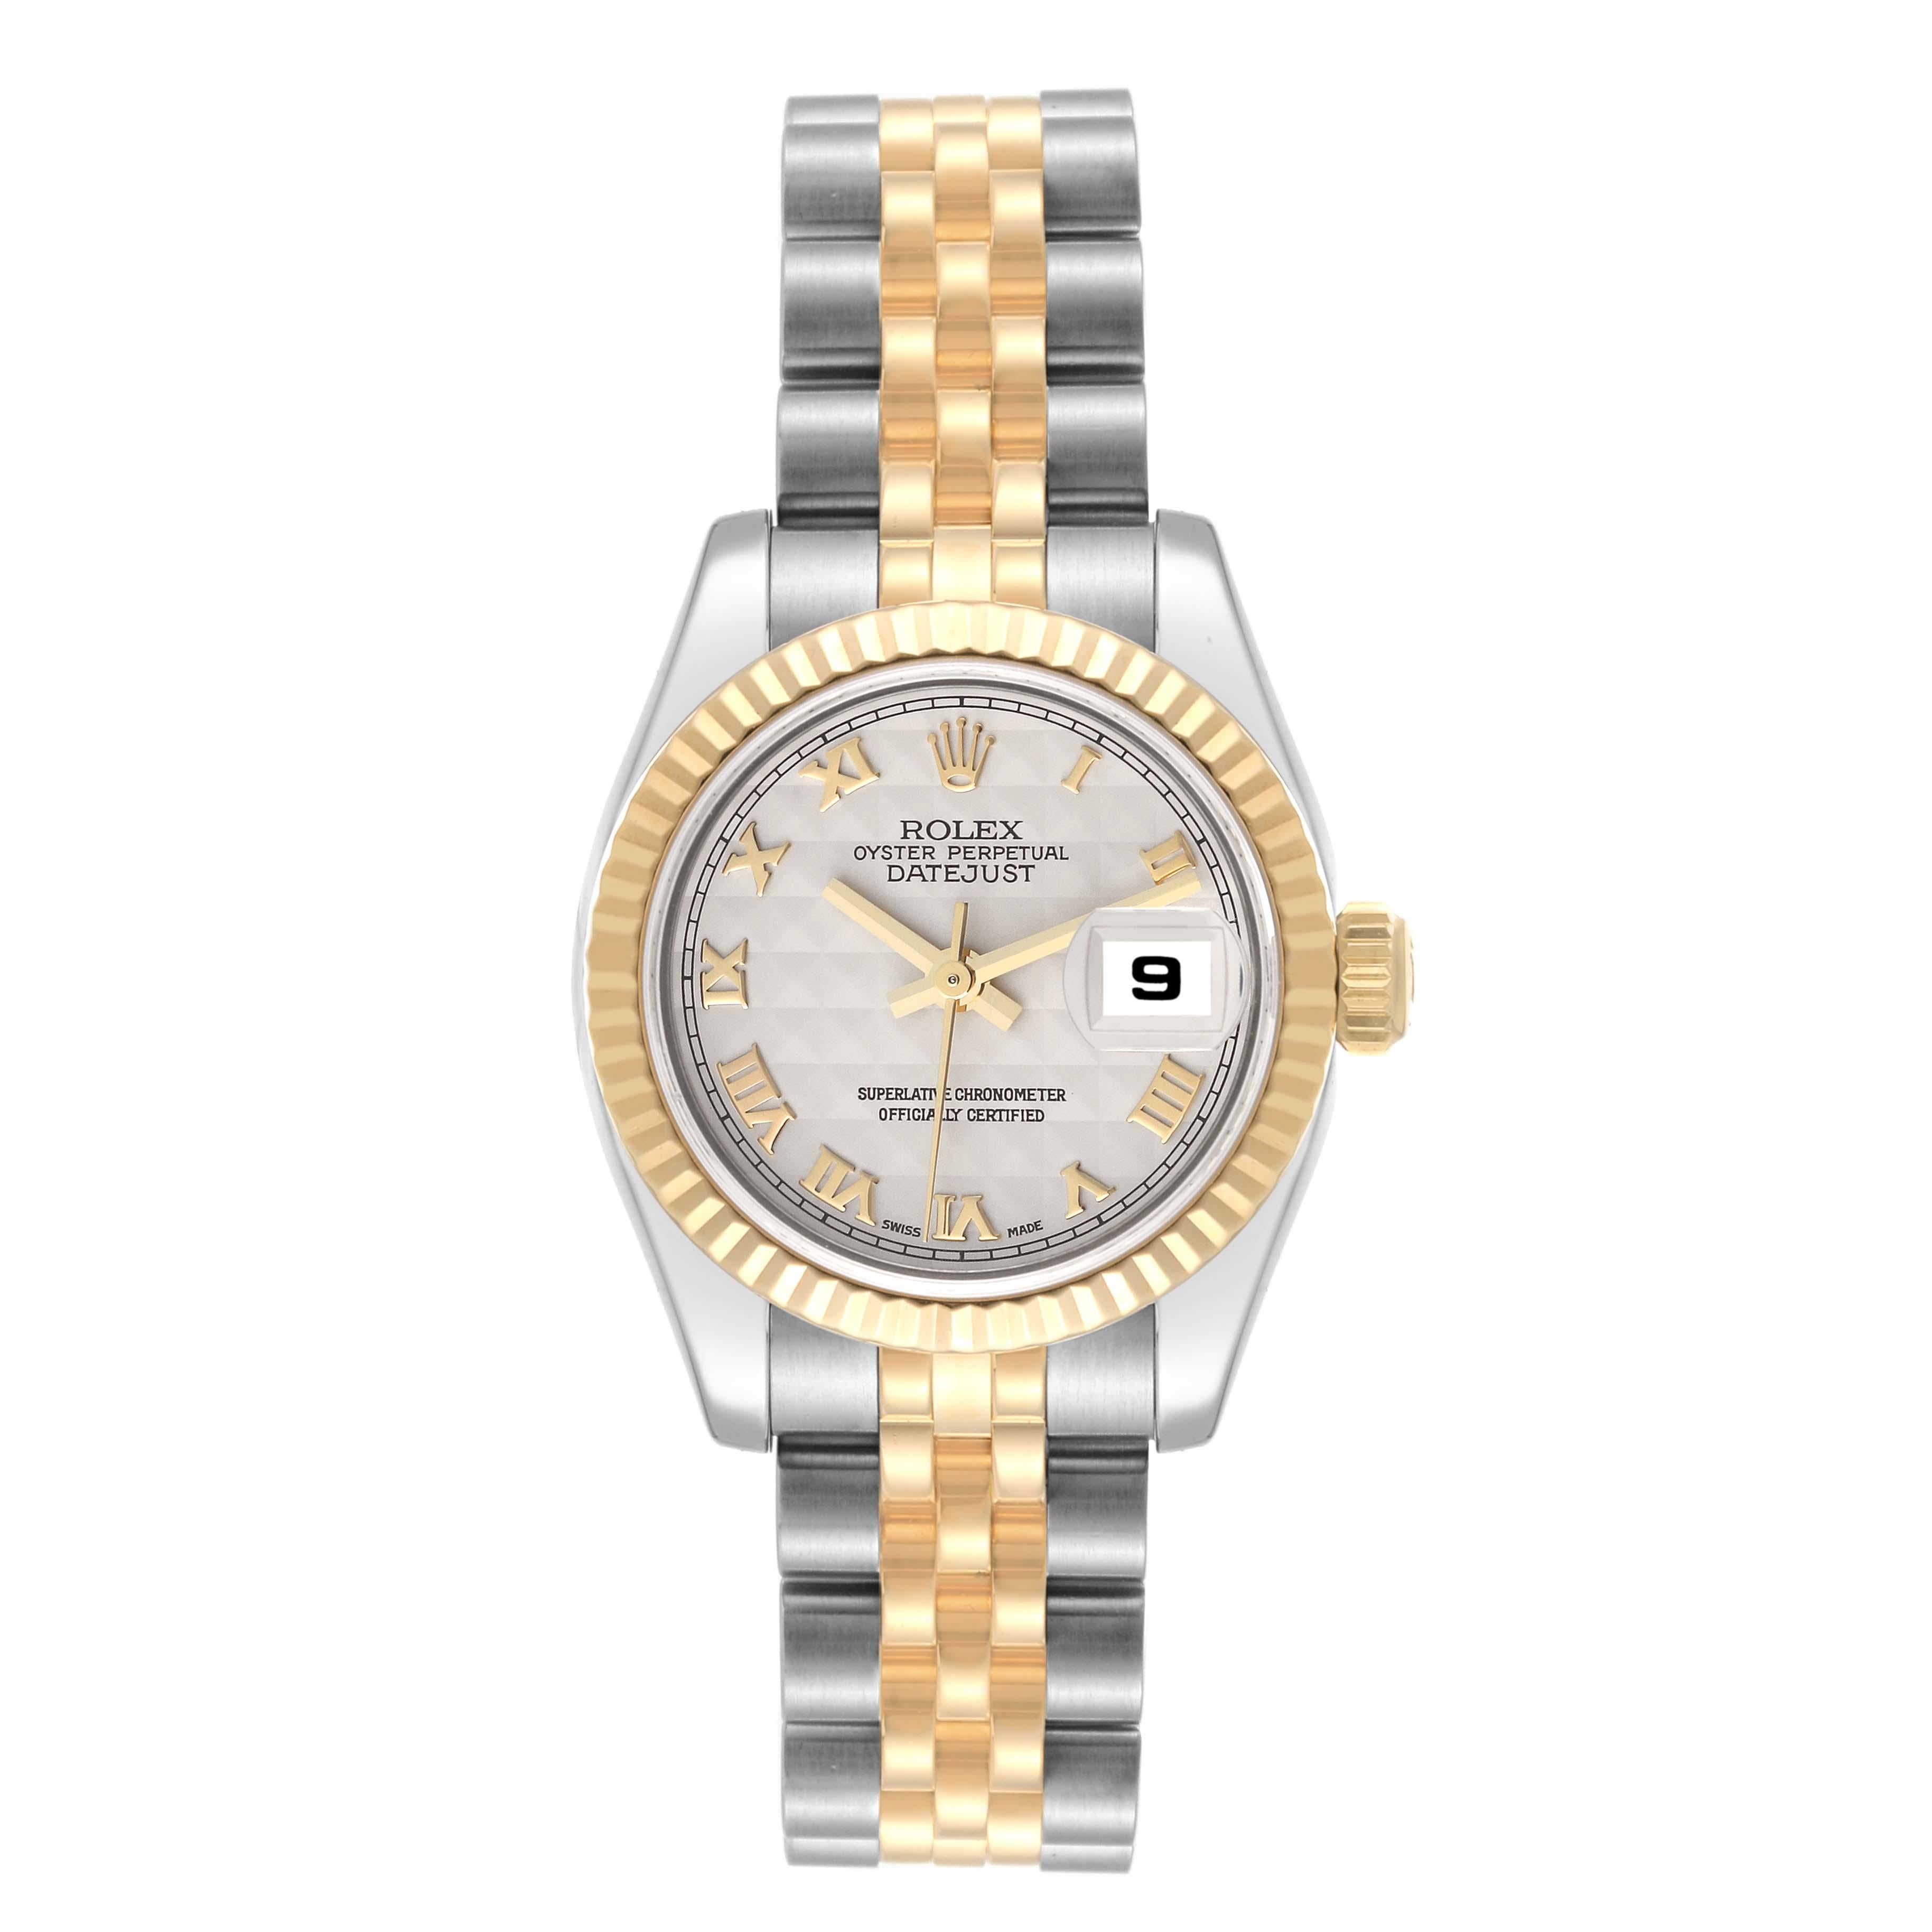 Rolex Datejust Steel Yellow Gold Ivory Pyramid Dial Ladies Watch 179173. Officially certified chronometer self-winding movement. Stainless steel oyster case 26 mm in diameter. Rolex logo on an 18K yellow gold crown. 18k yellow gold fluted bezel.